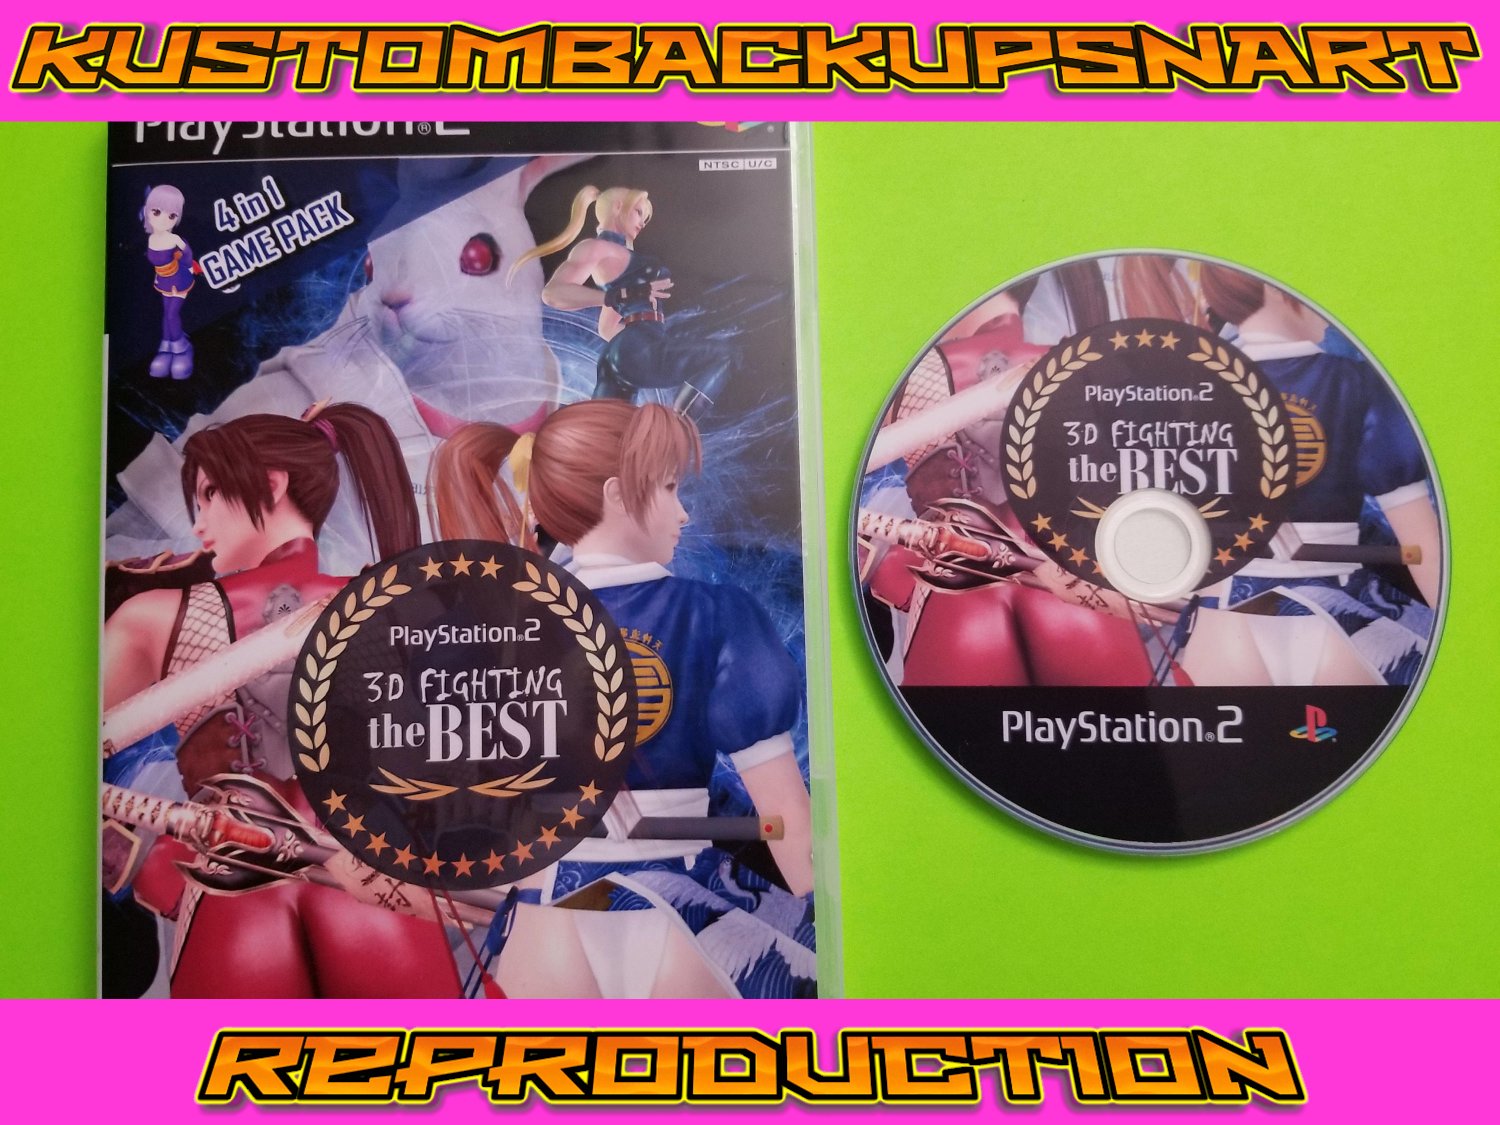 3D fighting the Best Custom Compilation Reproduction Case and Art Disc for Playstation 2